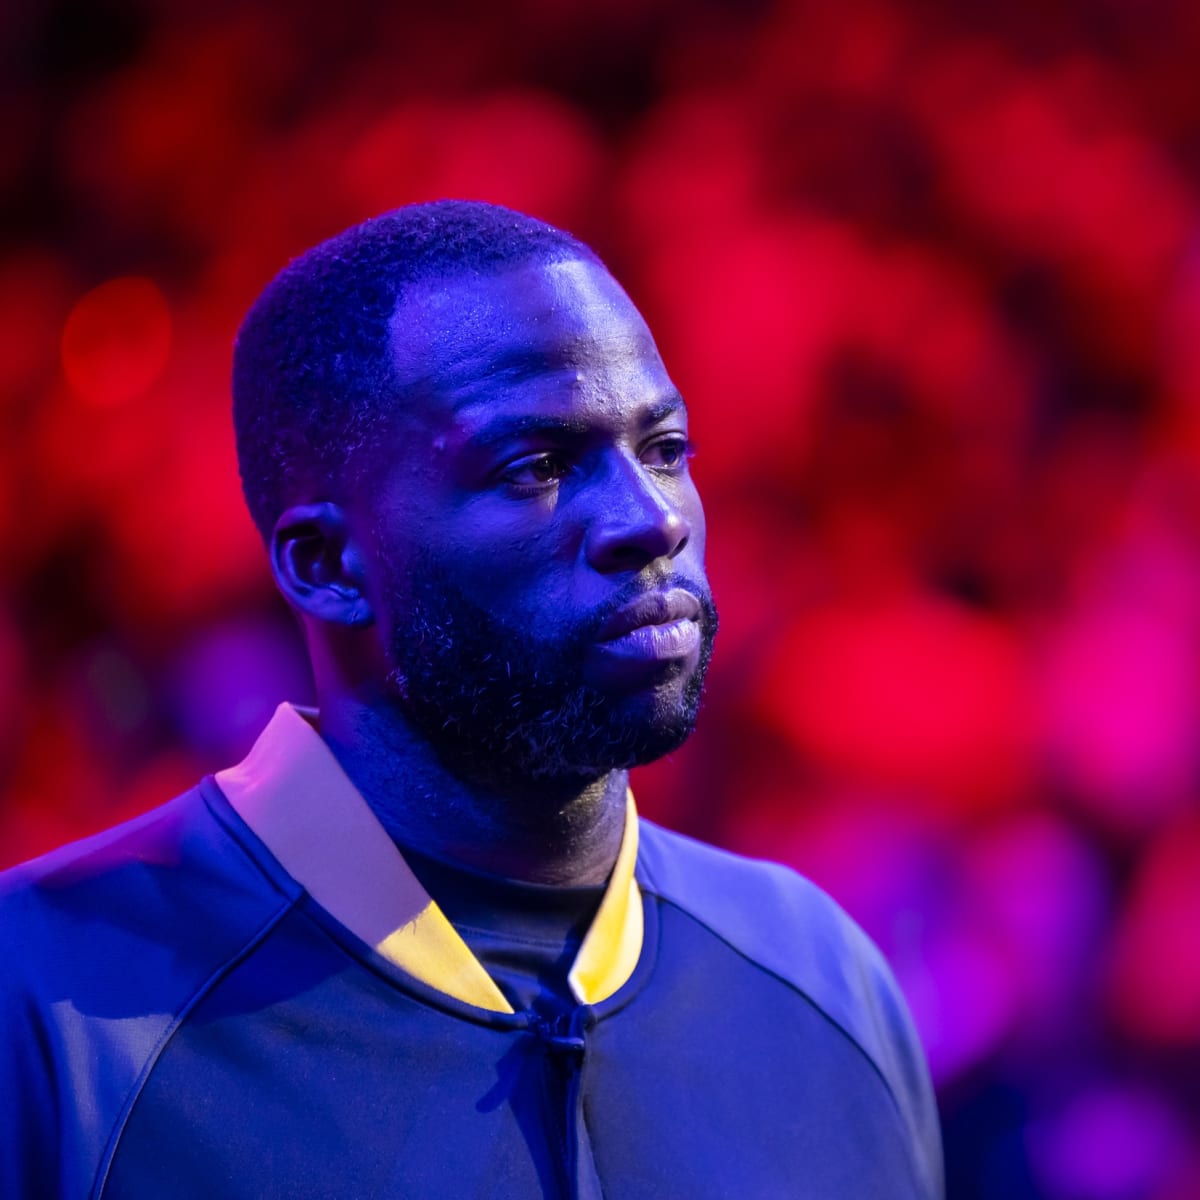 Former NBA Star Shares Bizarre Support for Draymond Green's Antics - Sports  Illustrated Memphis Grizzles News, Analysis and More